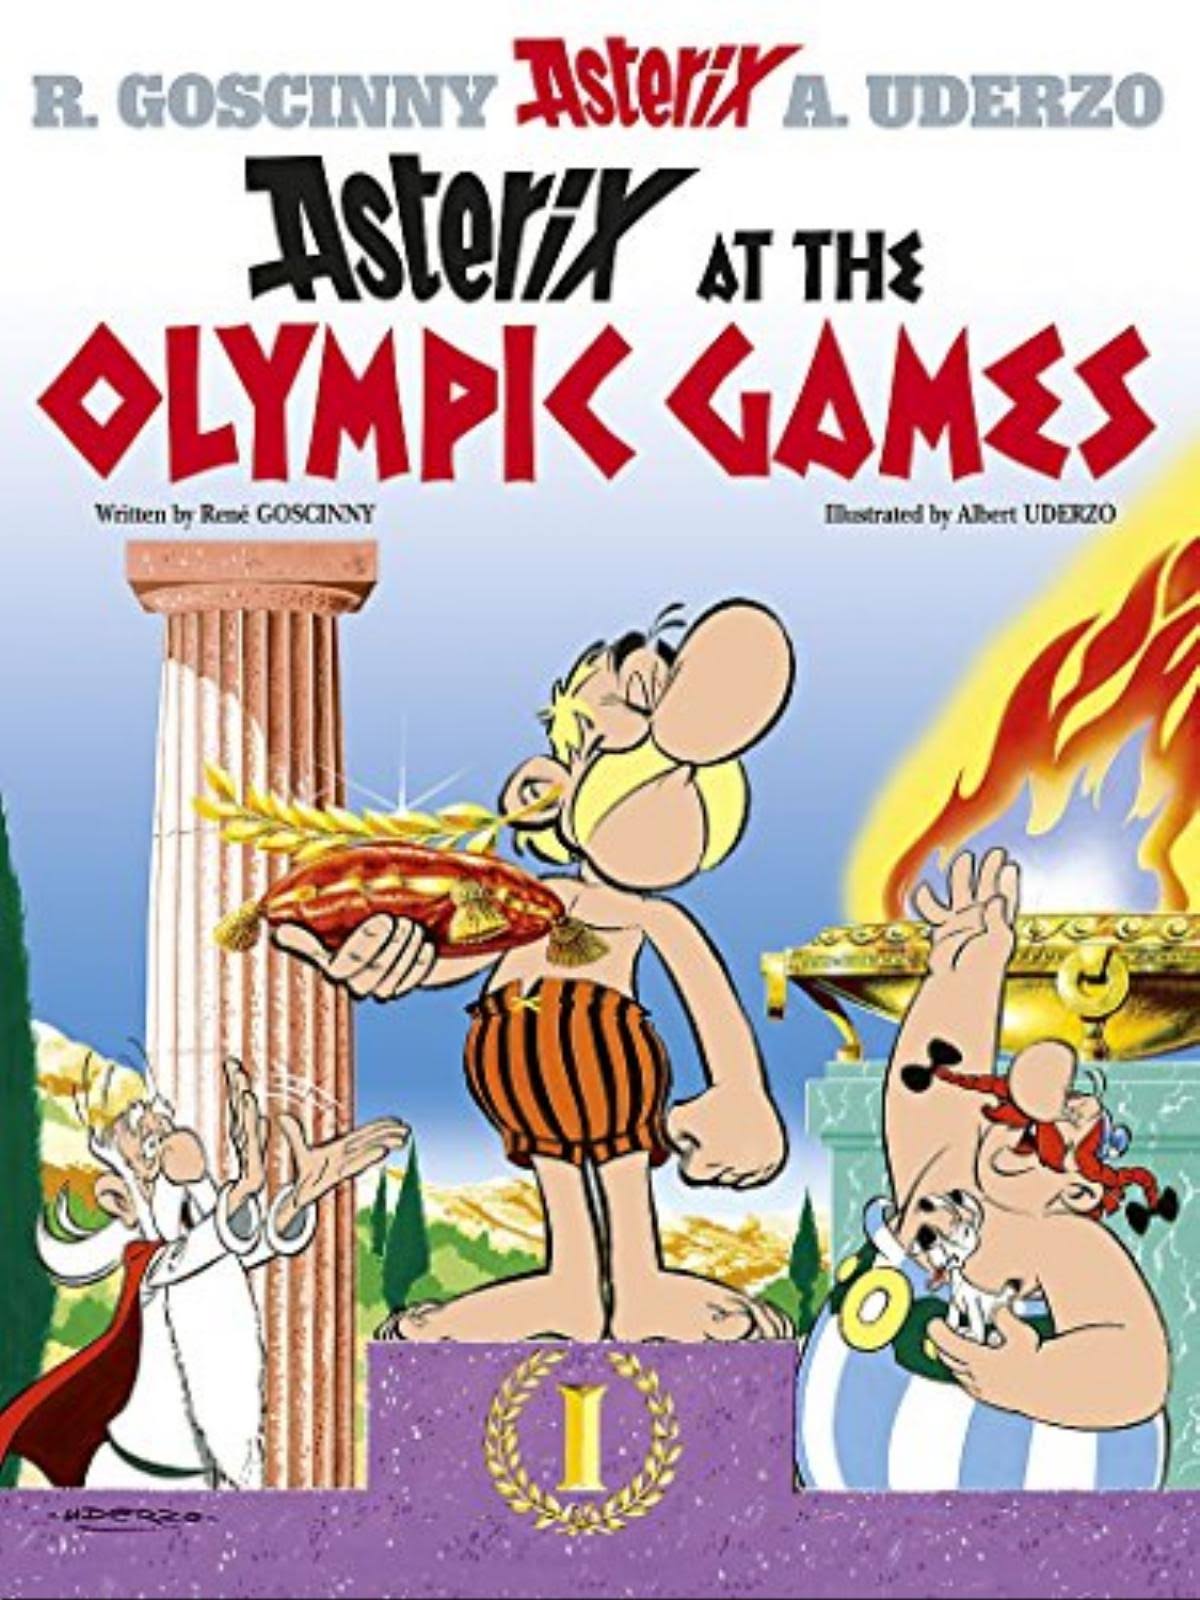 Asterix at The Olympic Games by Rene Goscinny